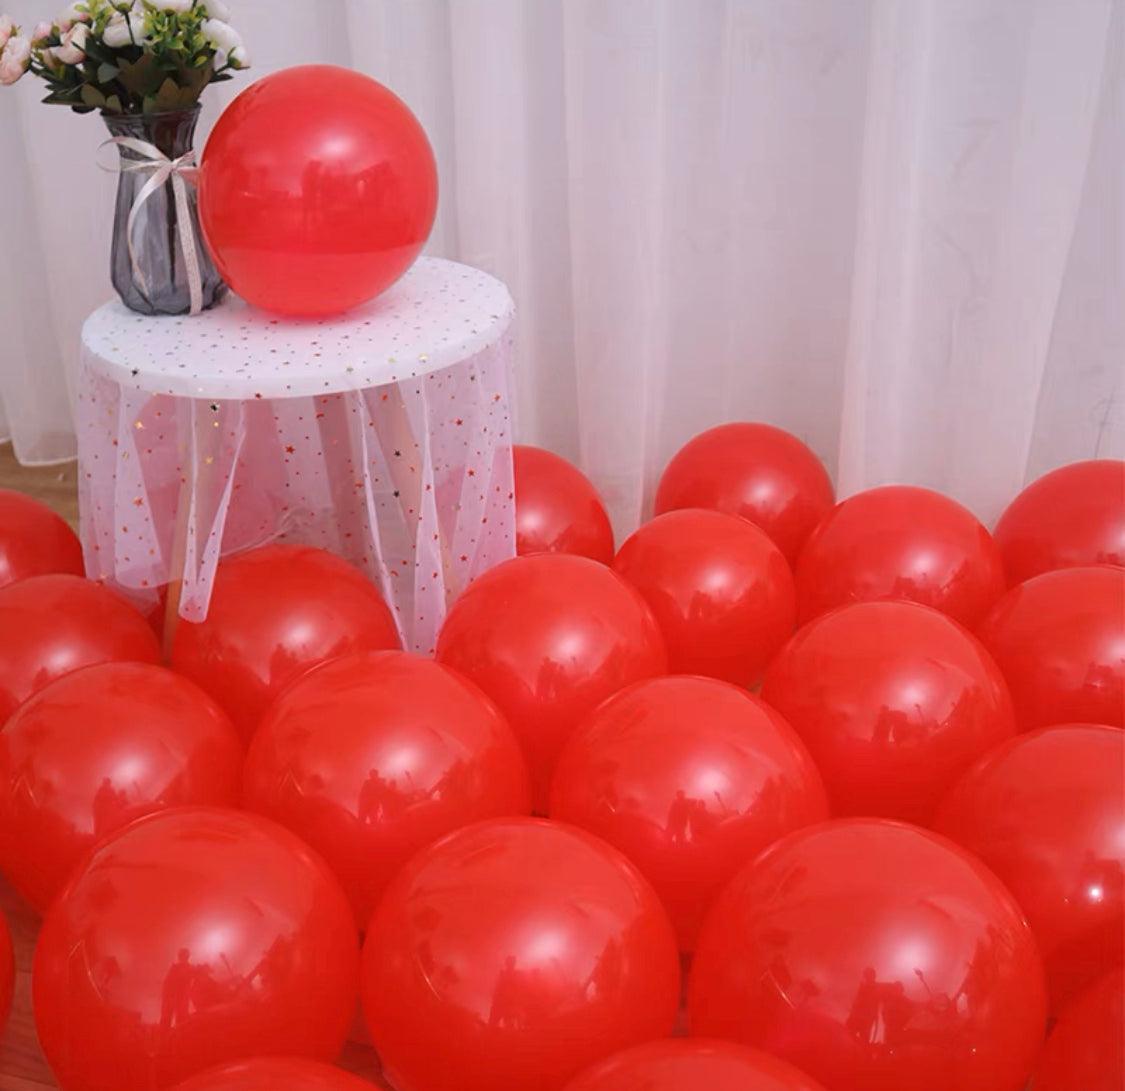 Global Shipping (50 pack) 11 inch Red Balloons High Quality (Balloons Only) - ONE UP BALLOONS